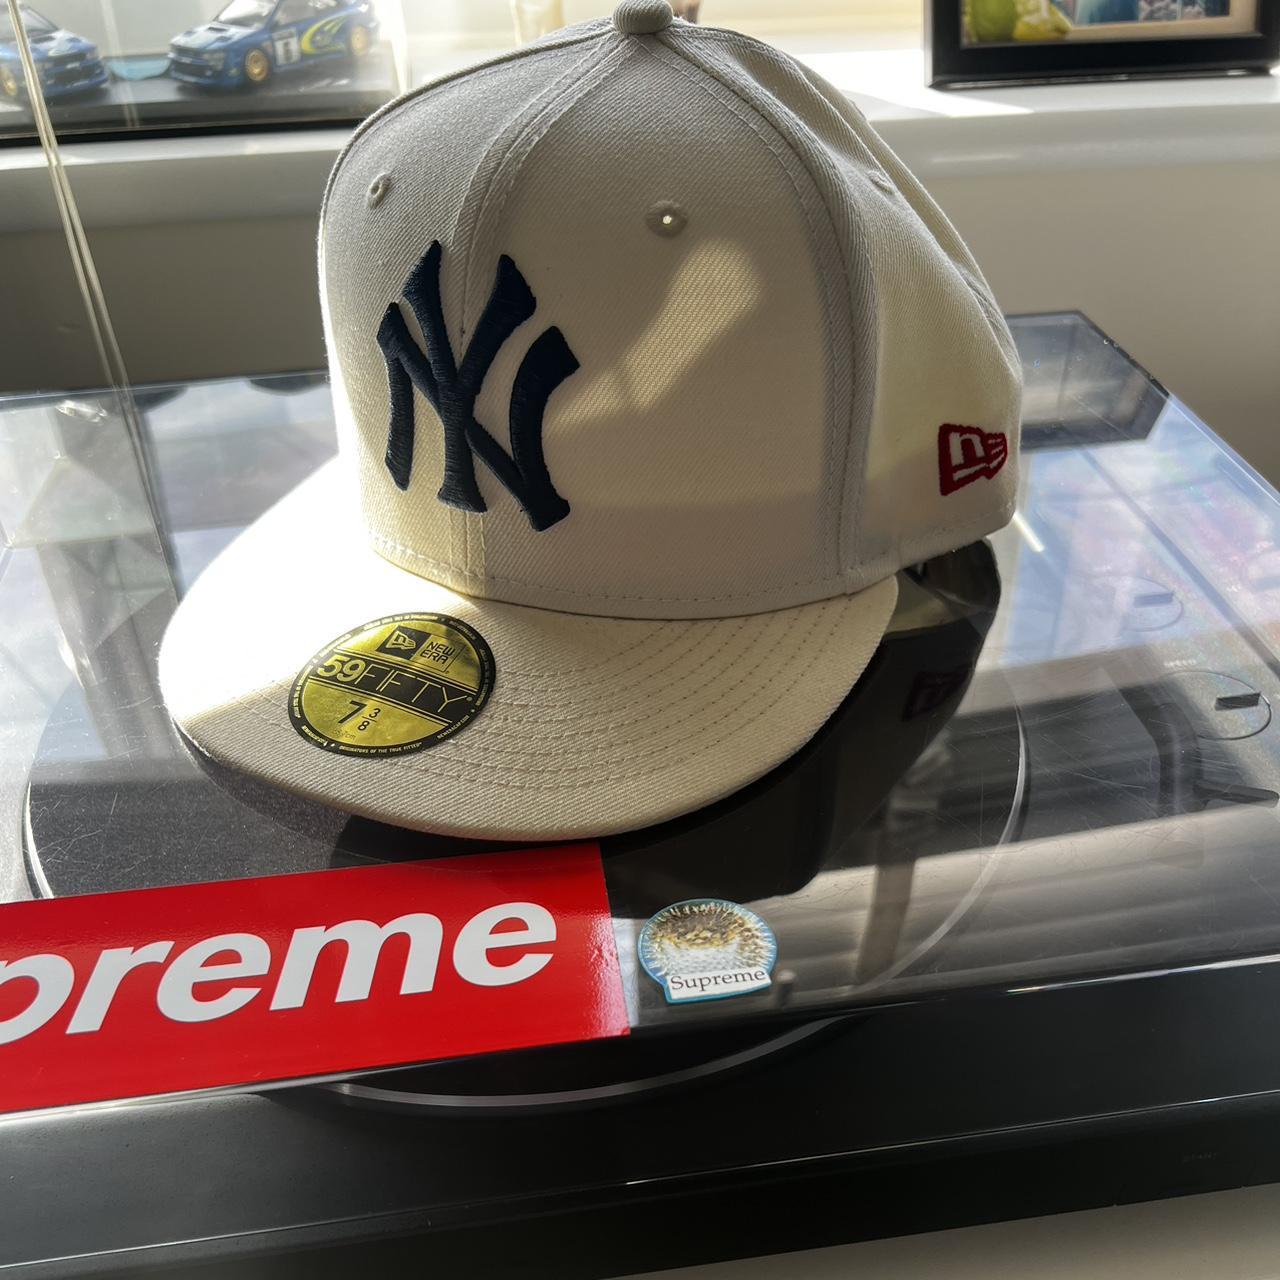 420,420.69 dollars for a yankee hat with no brim : r